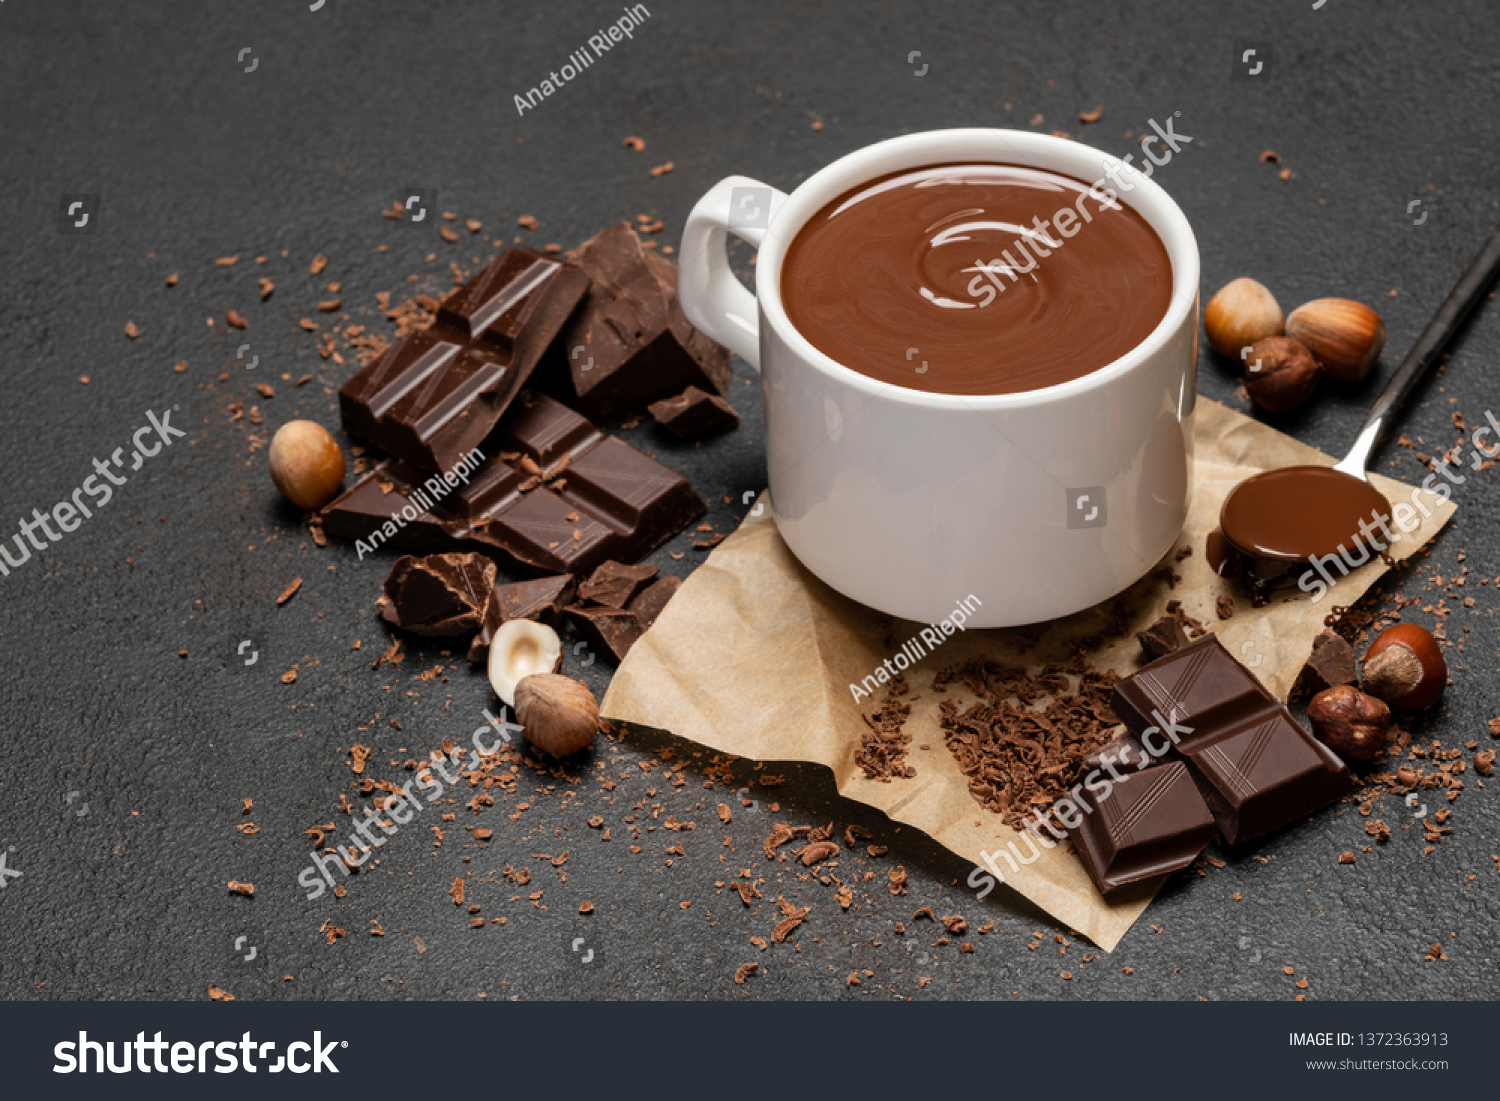 Cup of hot chocolate and pieces of chocolat on dark concrete background #1372363913